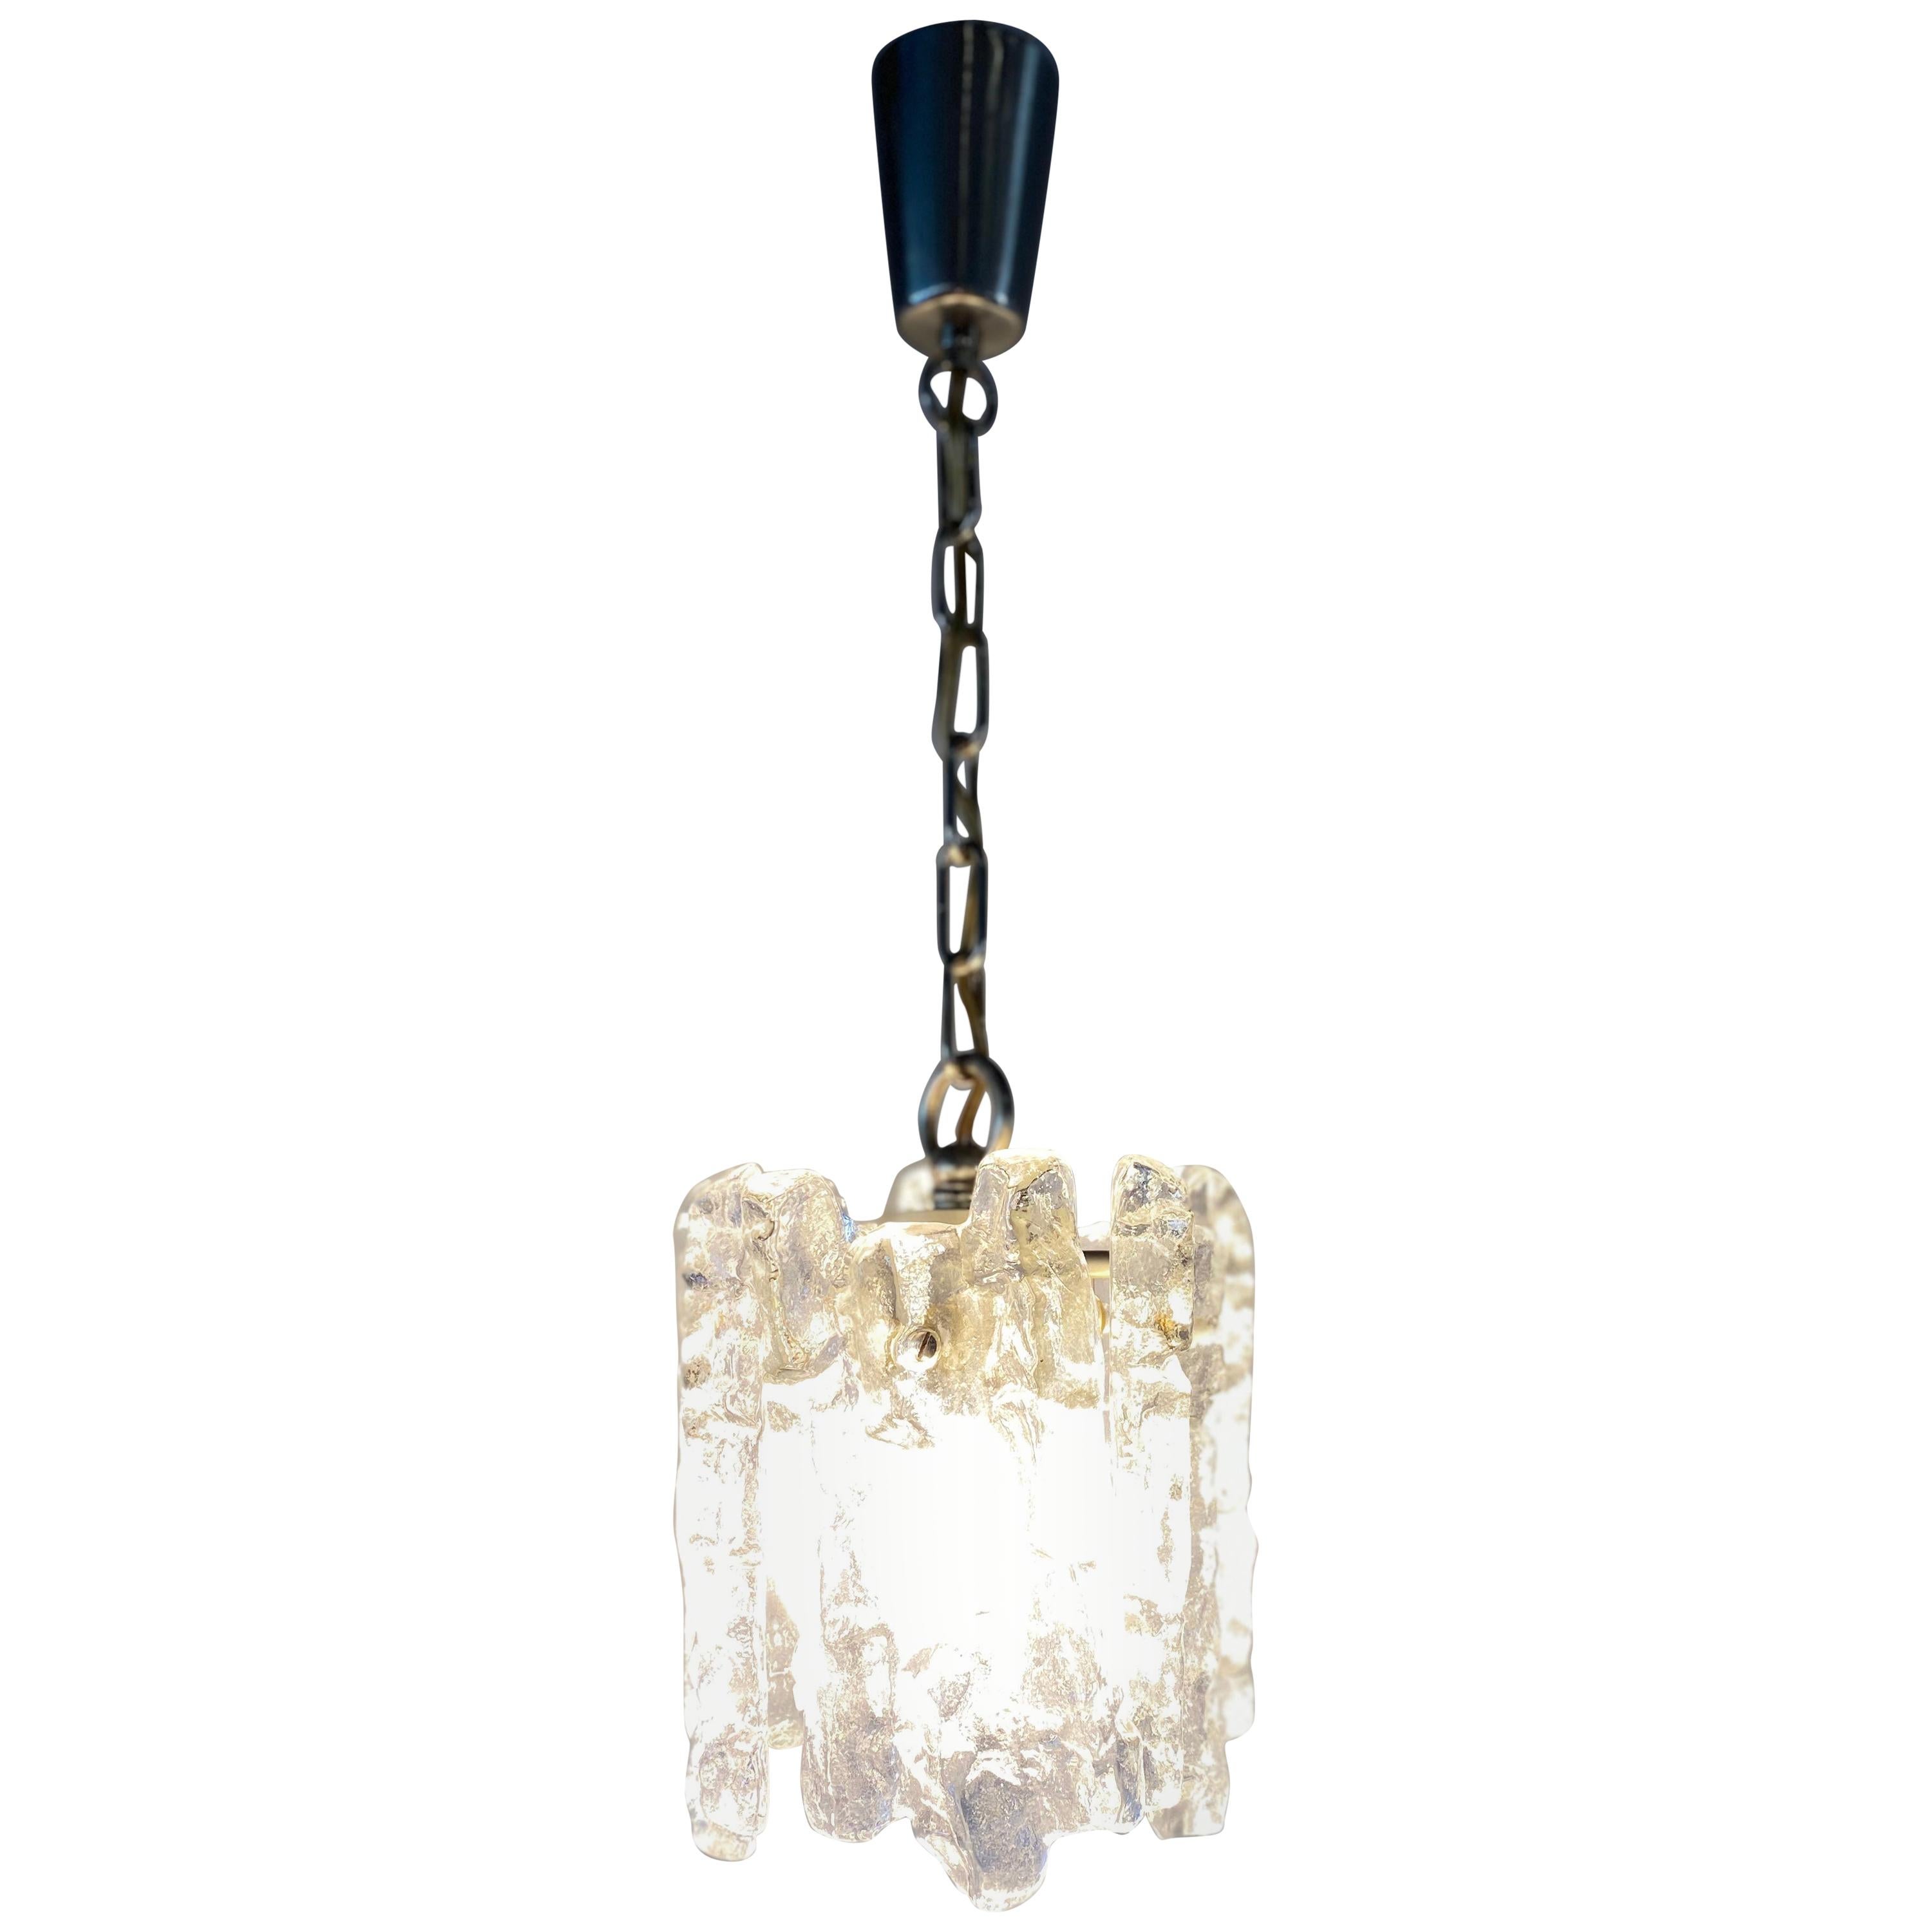 Small J.T. Kalmar 'Ice Glass' Chandelier, 1960s with One Lamp Socket For Sale